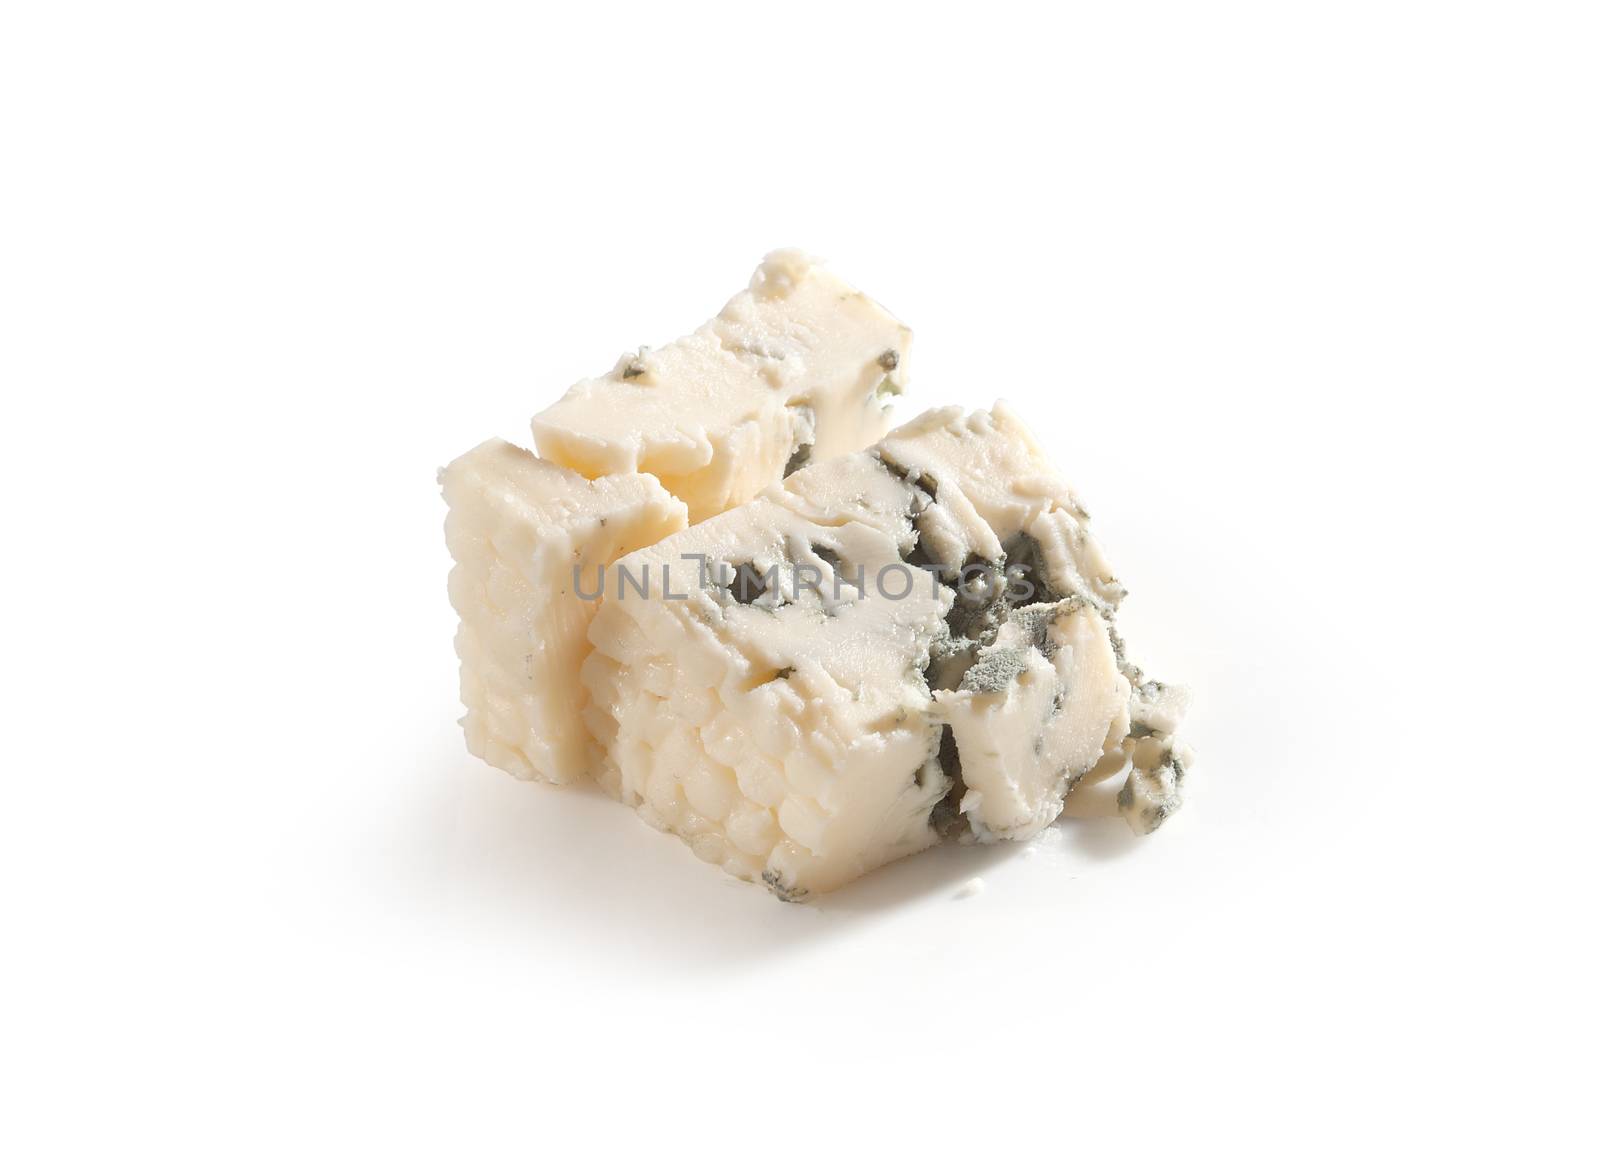 Blue cheese by Angorius